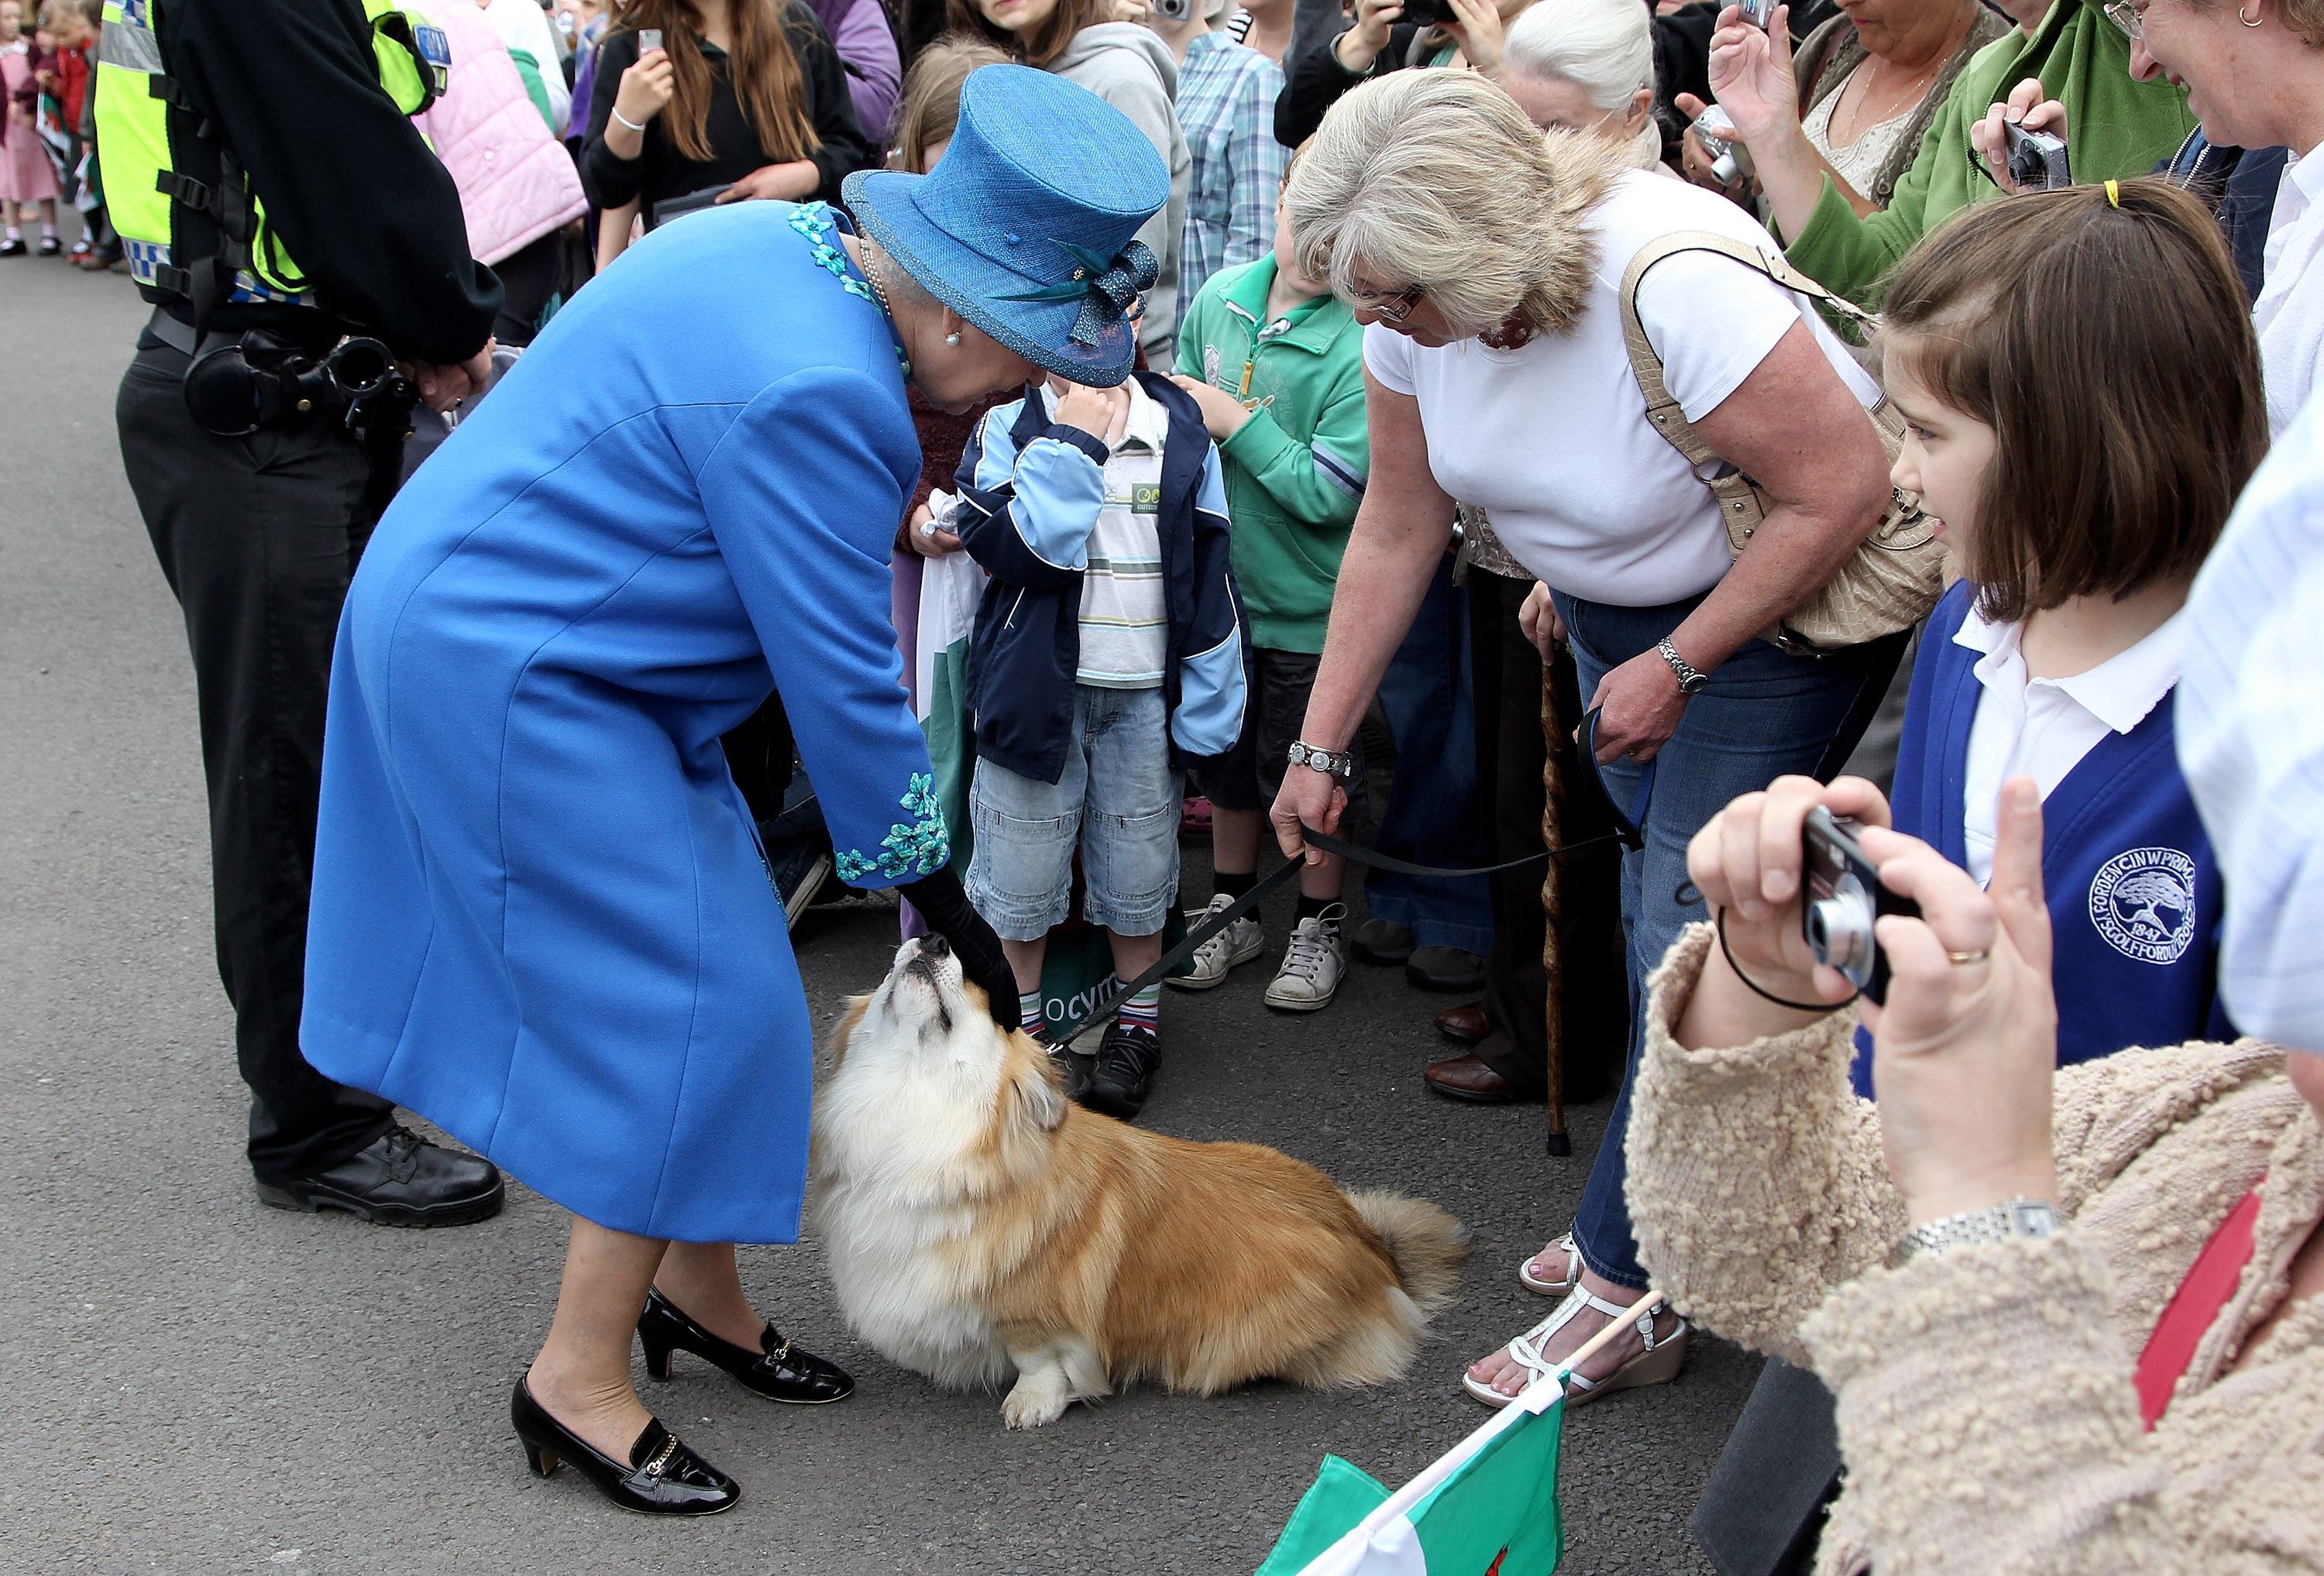 how many corgis has the queen